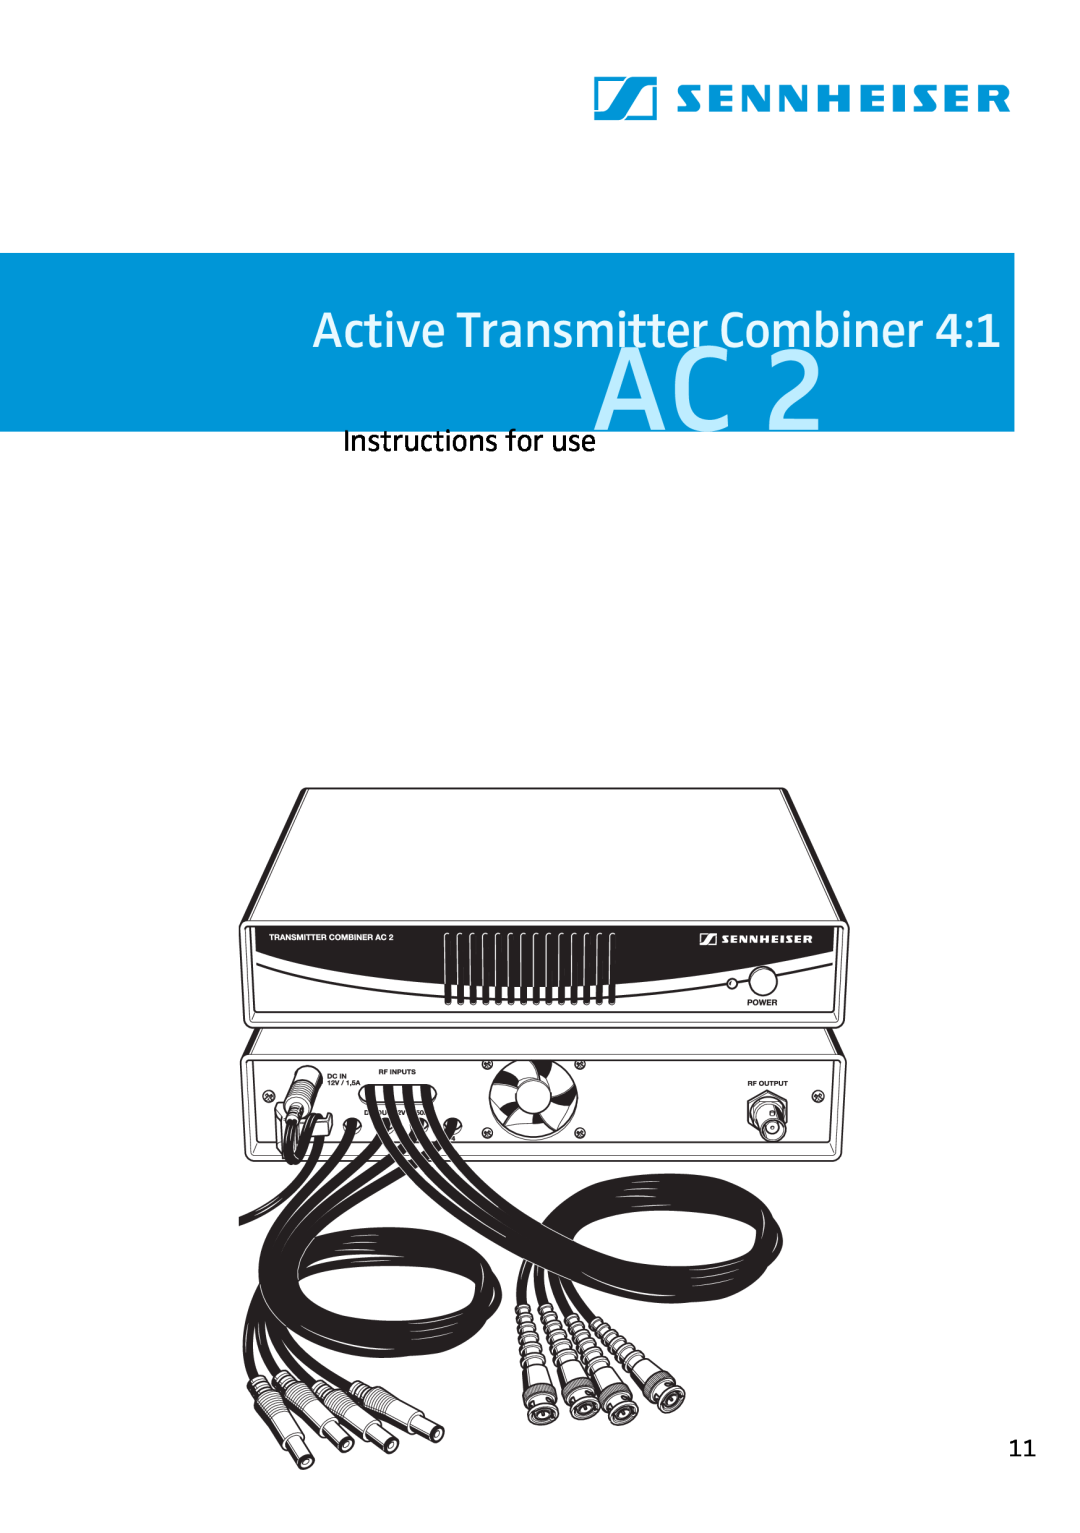 Sennheiser AC2 manual Active Transmitter Combiner, Instructions for useAC 